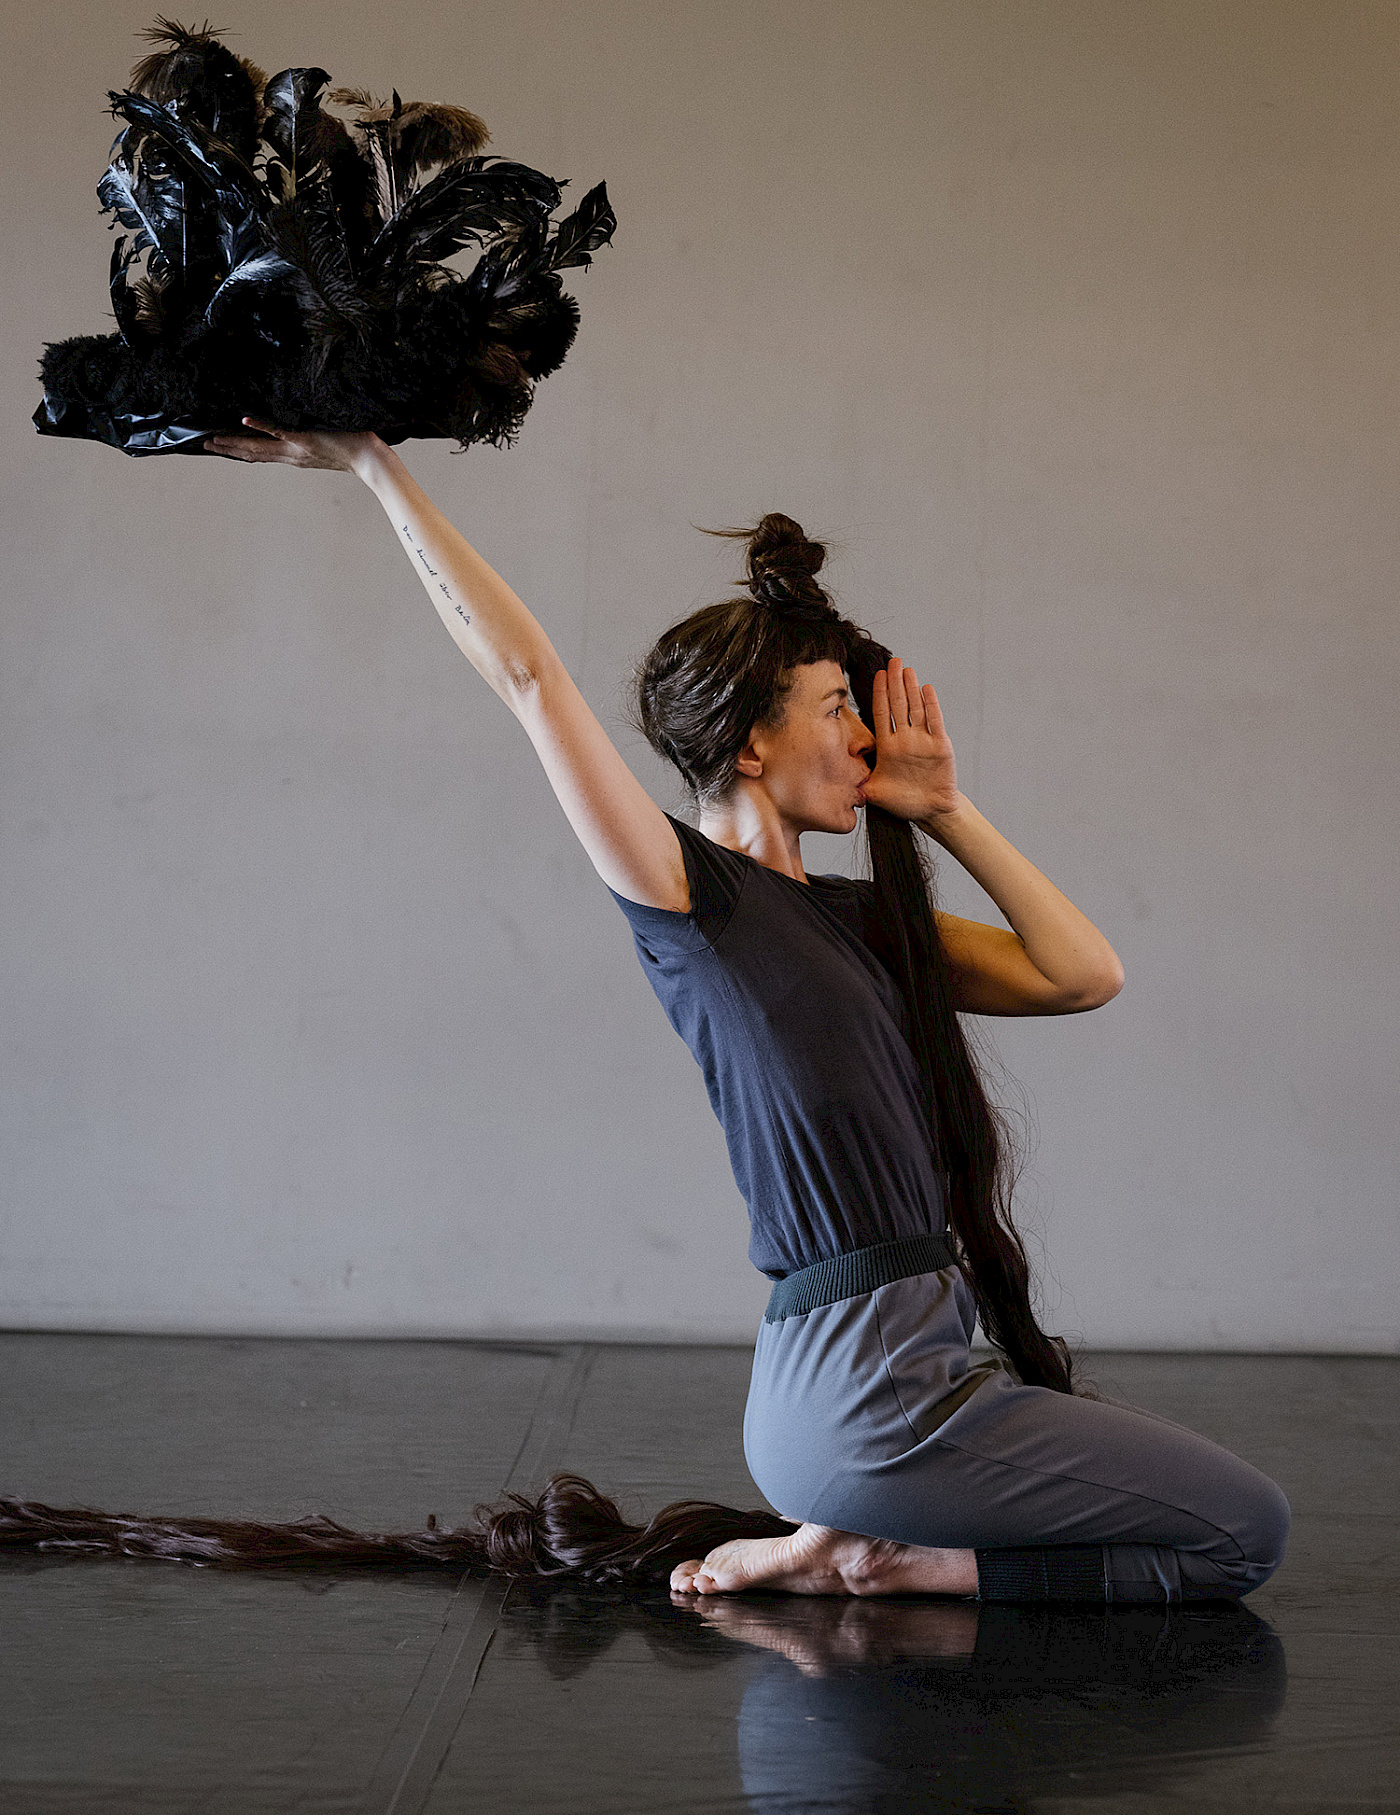 Dancer kneels on the floor, with her arm stretched out she holds a feather sculpture upwards, she has the thumb of her other hand in her mouth.